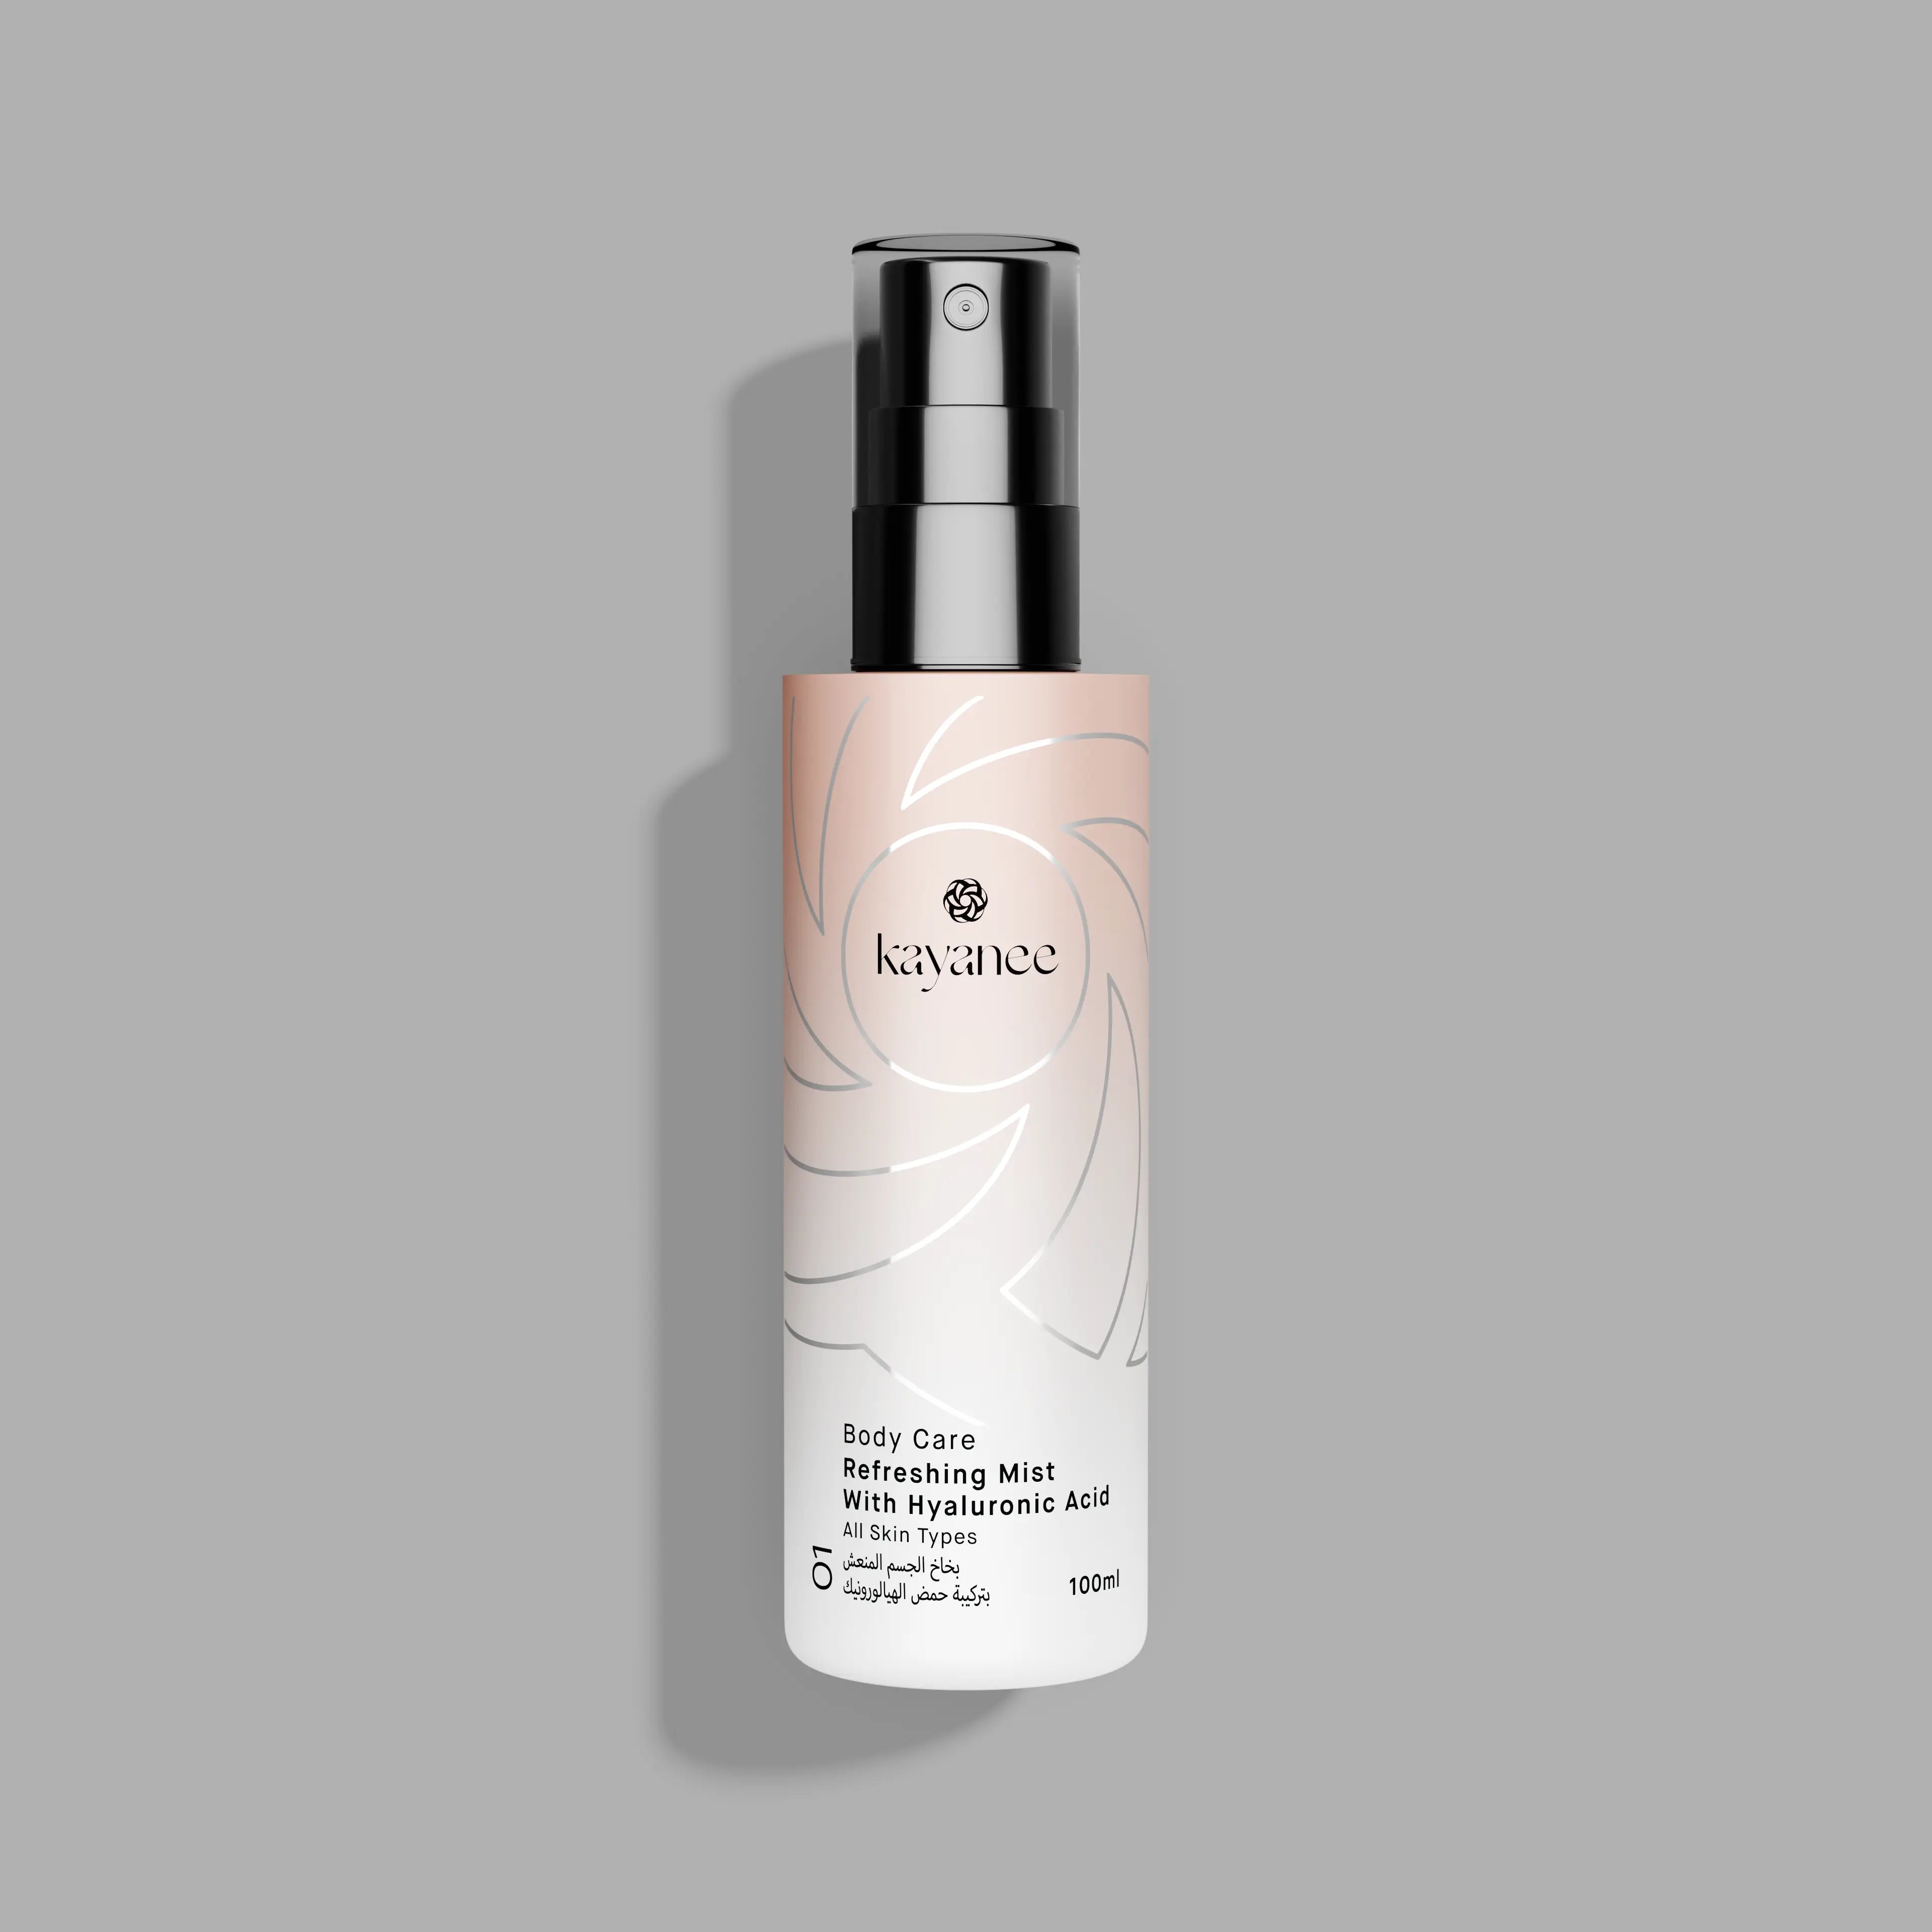 Refreshing Mist With Hyaluronic Acid